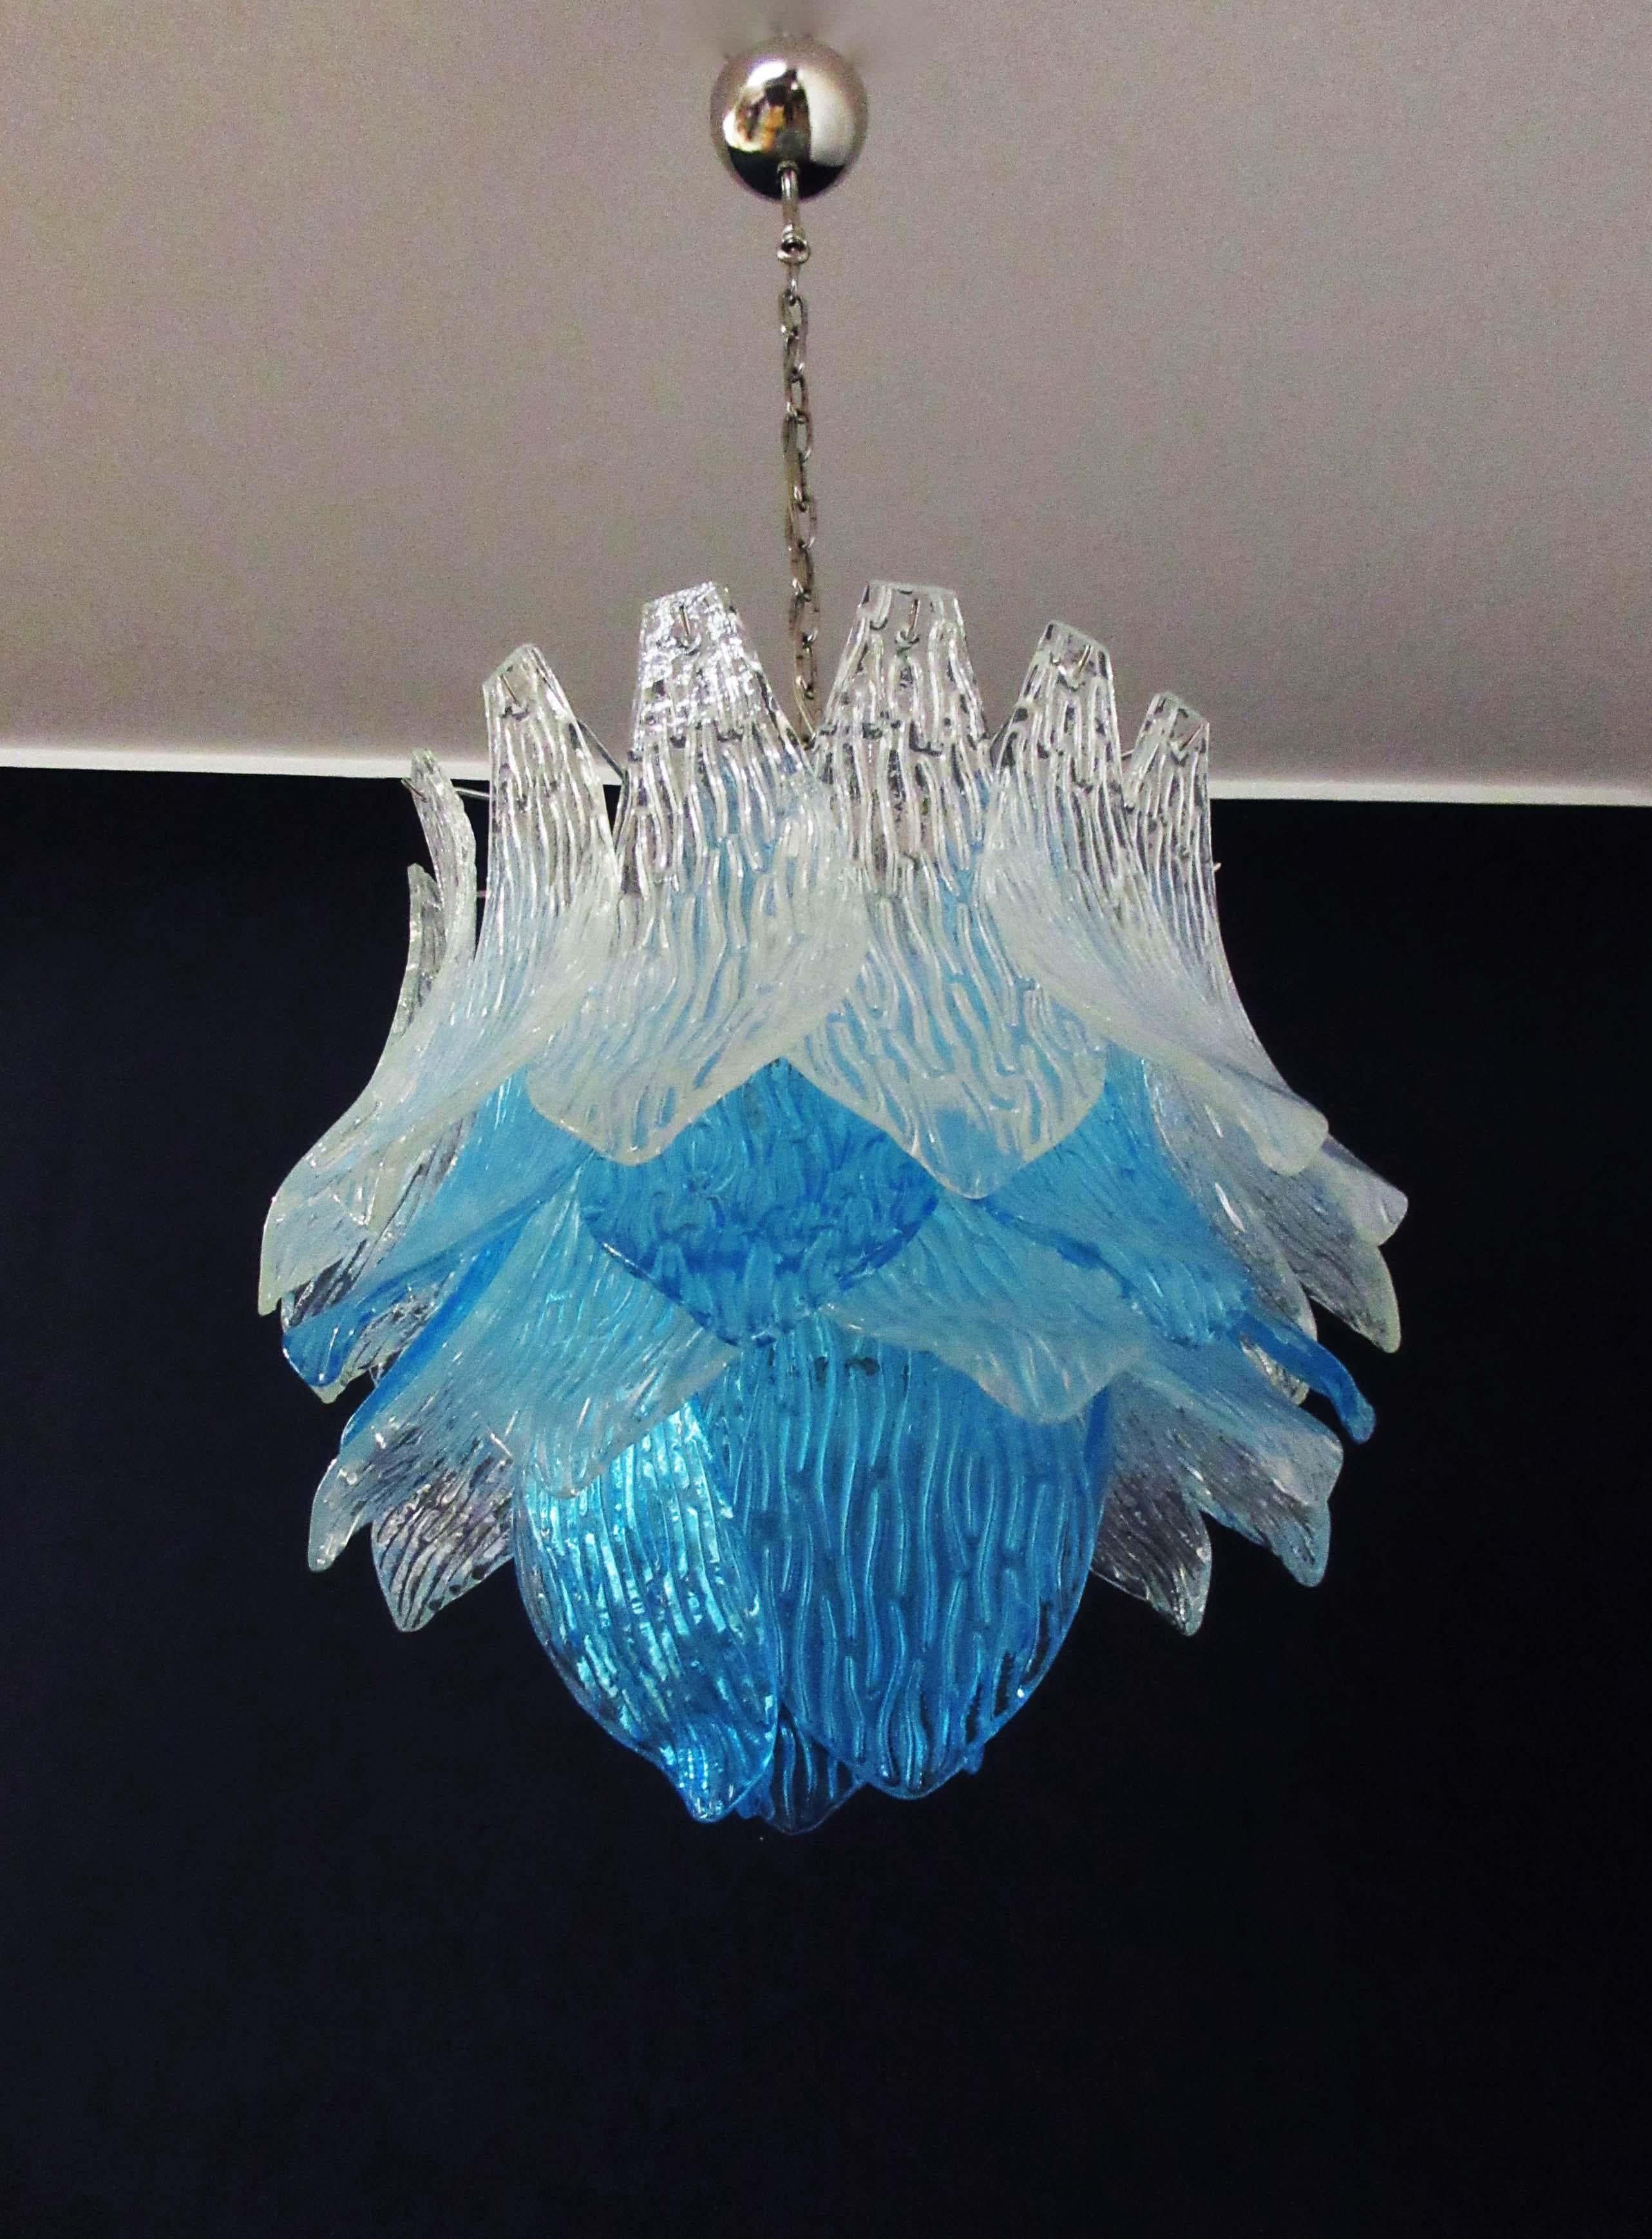 Talian Vintage Murano Glass Chandelier, 38 Glasses, Blue and Trasparent 8